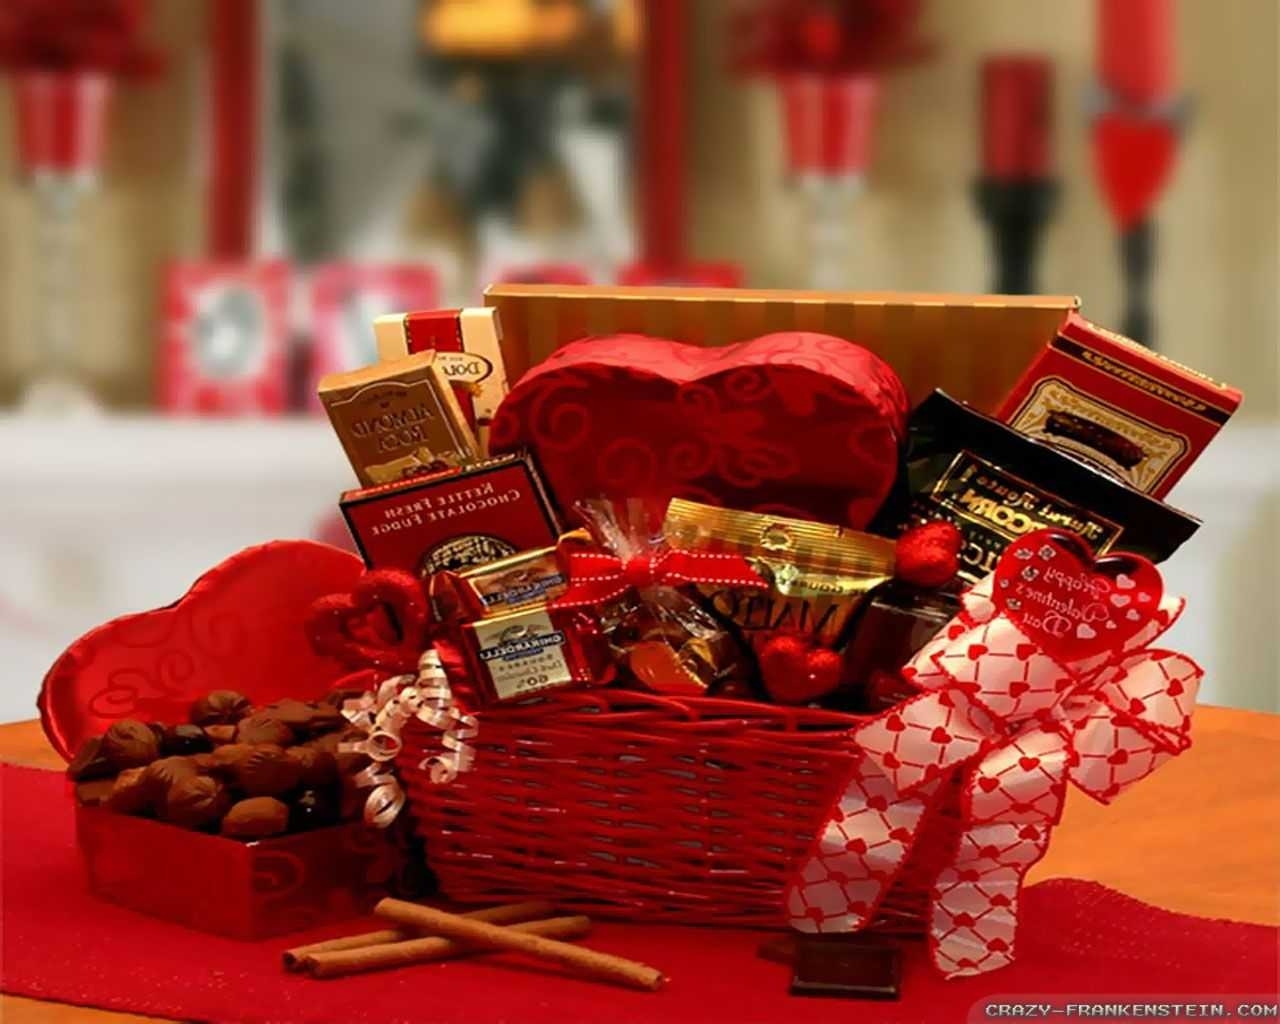 10 Attractive Great Ideas For Valentines Day For Her %name 2022